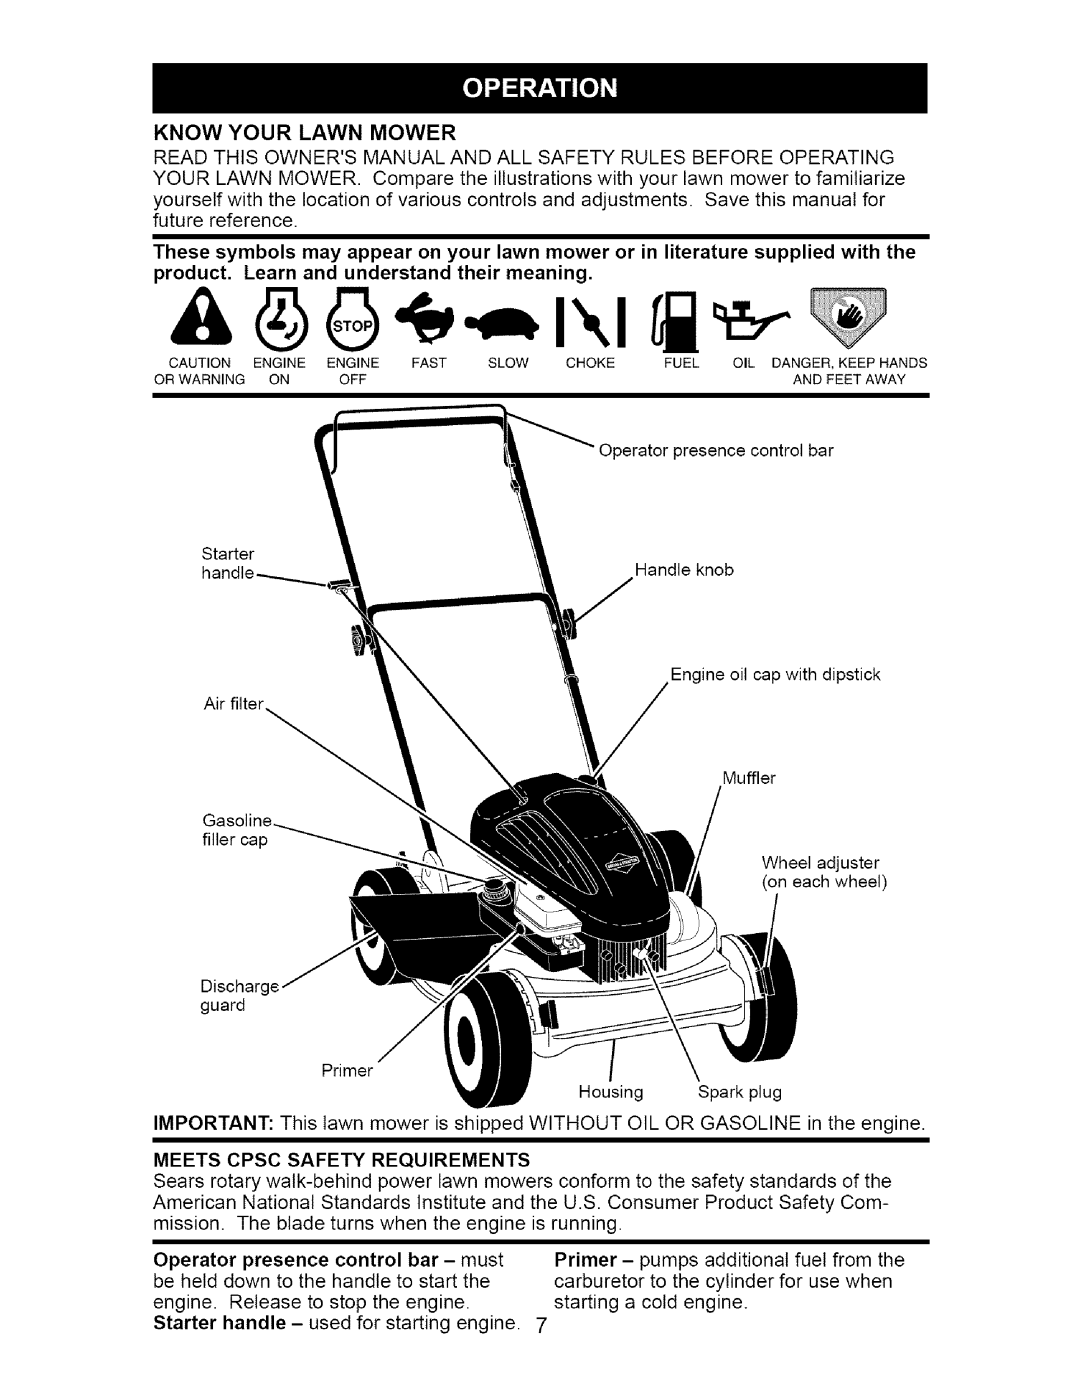 Craftsman 917.385122 manual Know Your Lawn Mower, product. Learn and understand their meaning 